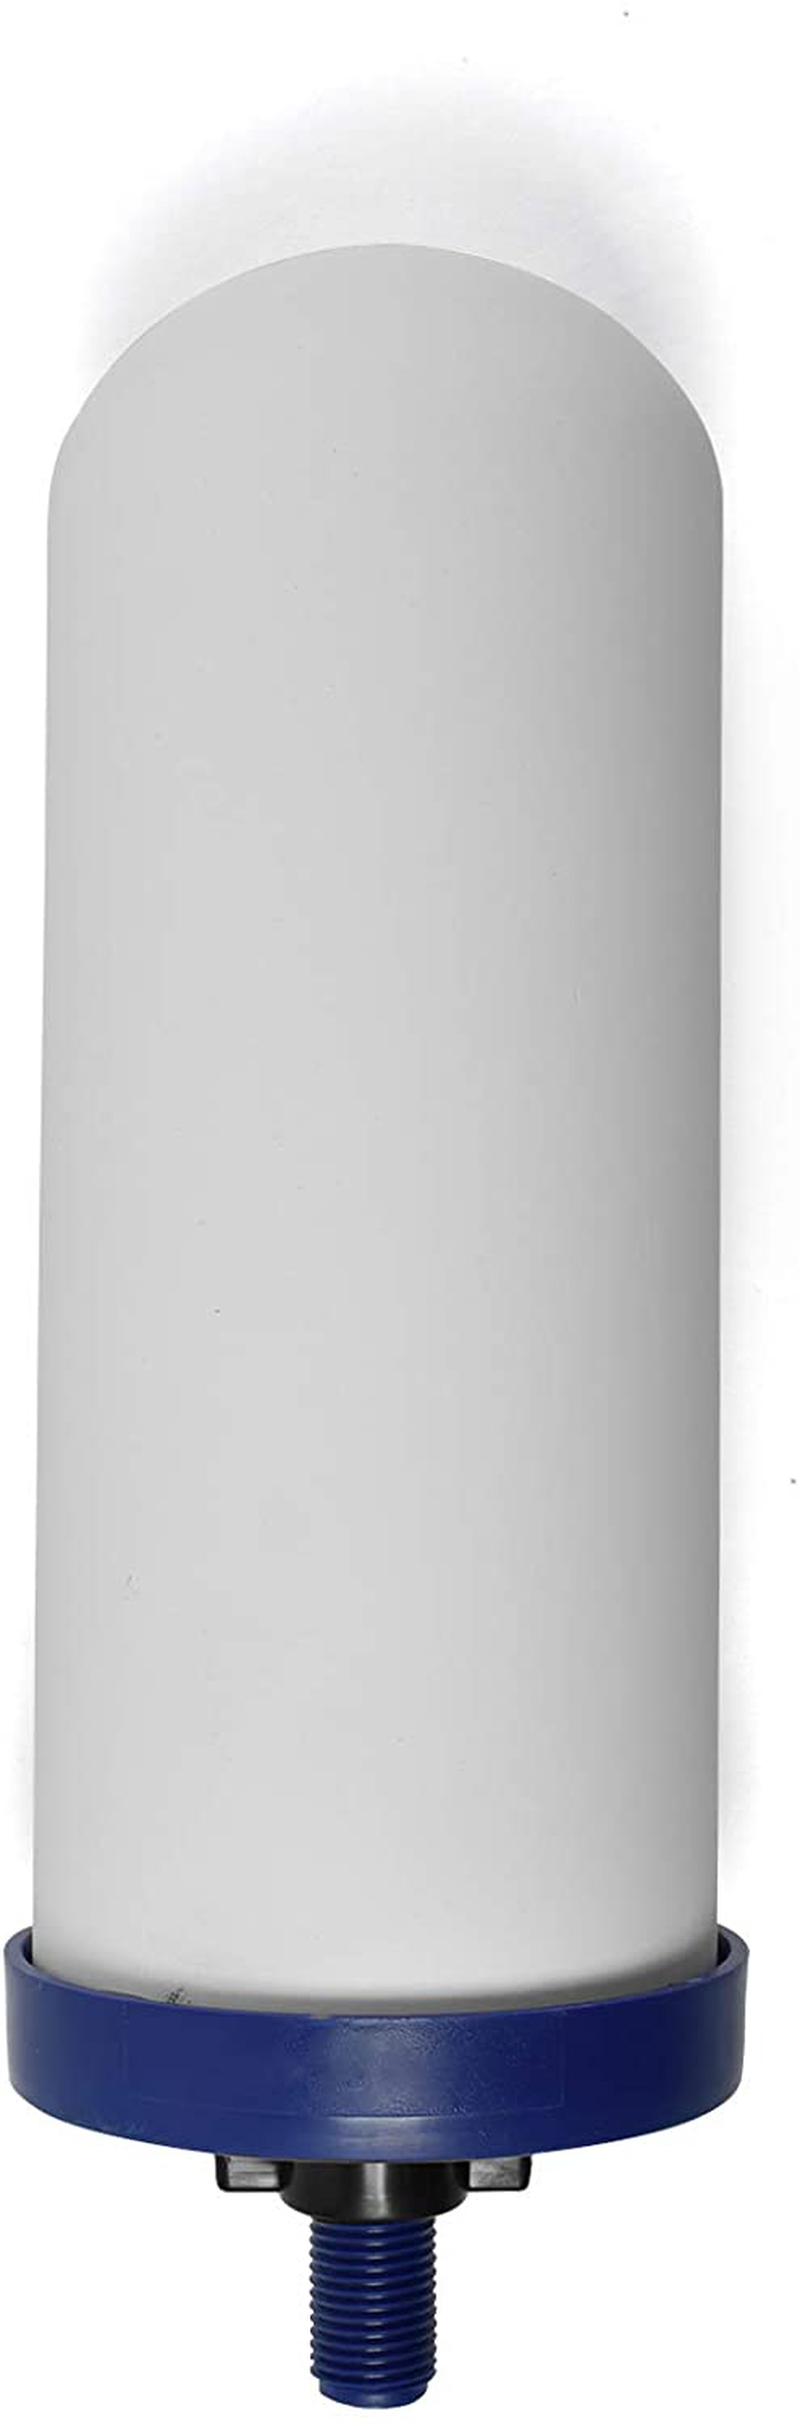 ProOne G2.0 7-Inch Gravity Water Replacement Filter, Big+ Replacement Water Filter for Countertop Gravity Water Filtration Systems